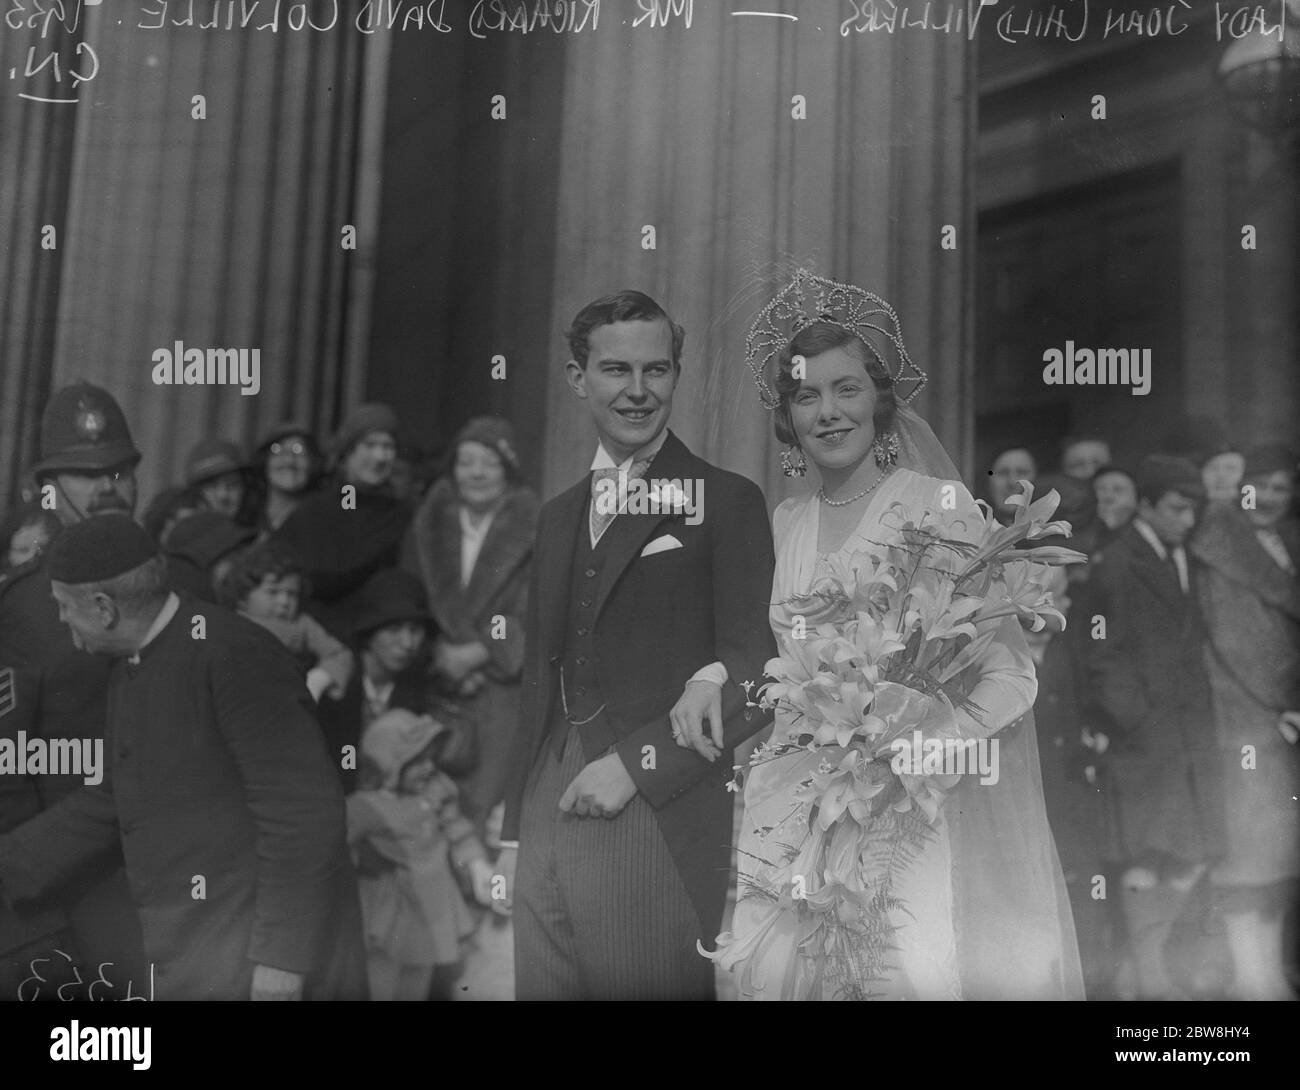 Lady Joan Child Villiers married . Lady Joan Child Villiers was married to Mr David Colville at St Peter ' s , Eaton Square . The bride and bridegroom . 21 January 1933 Stock Photo